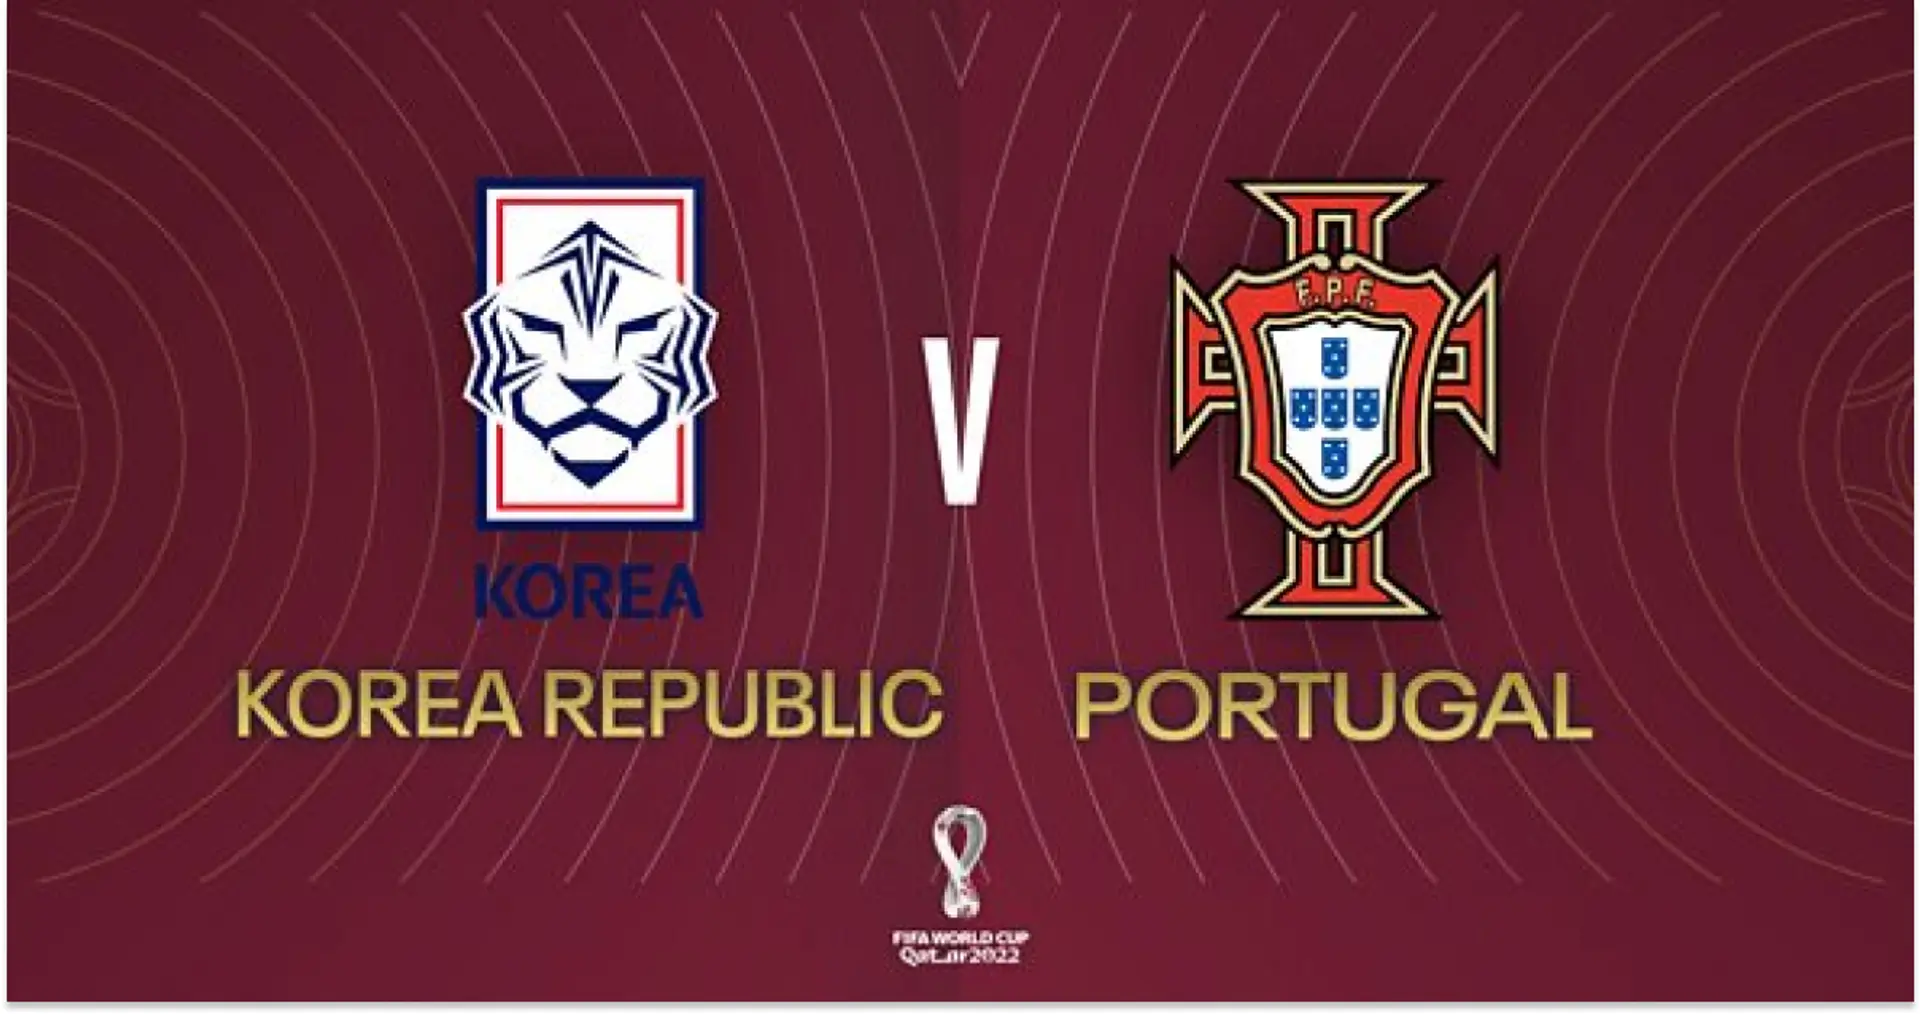 South Korea vs Portugal: Official team lineups for the World Cup clash revealed